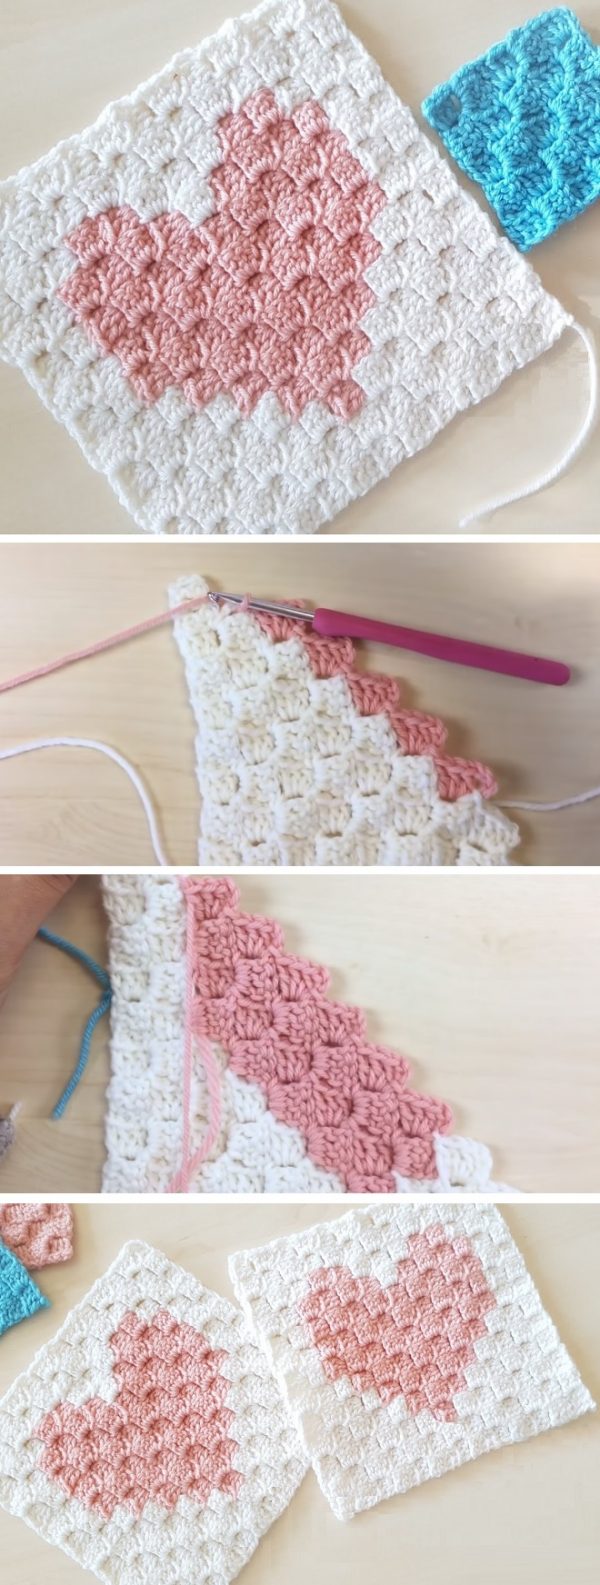 Crochet Heart In A Square Tutorials And More 5816